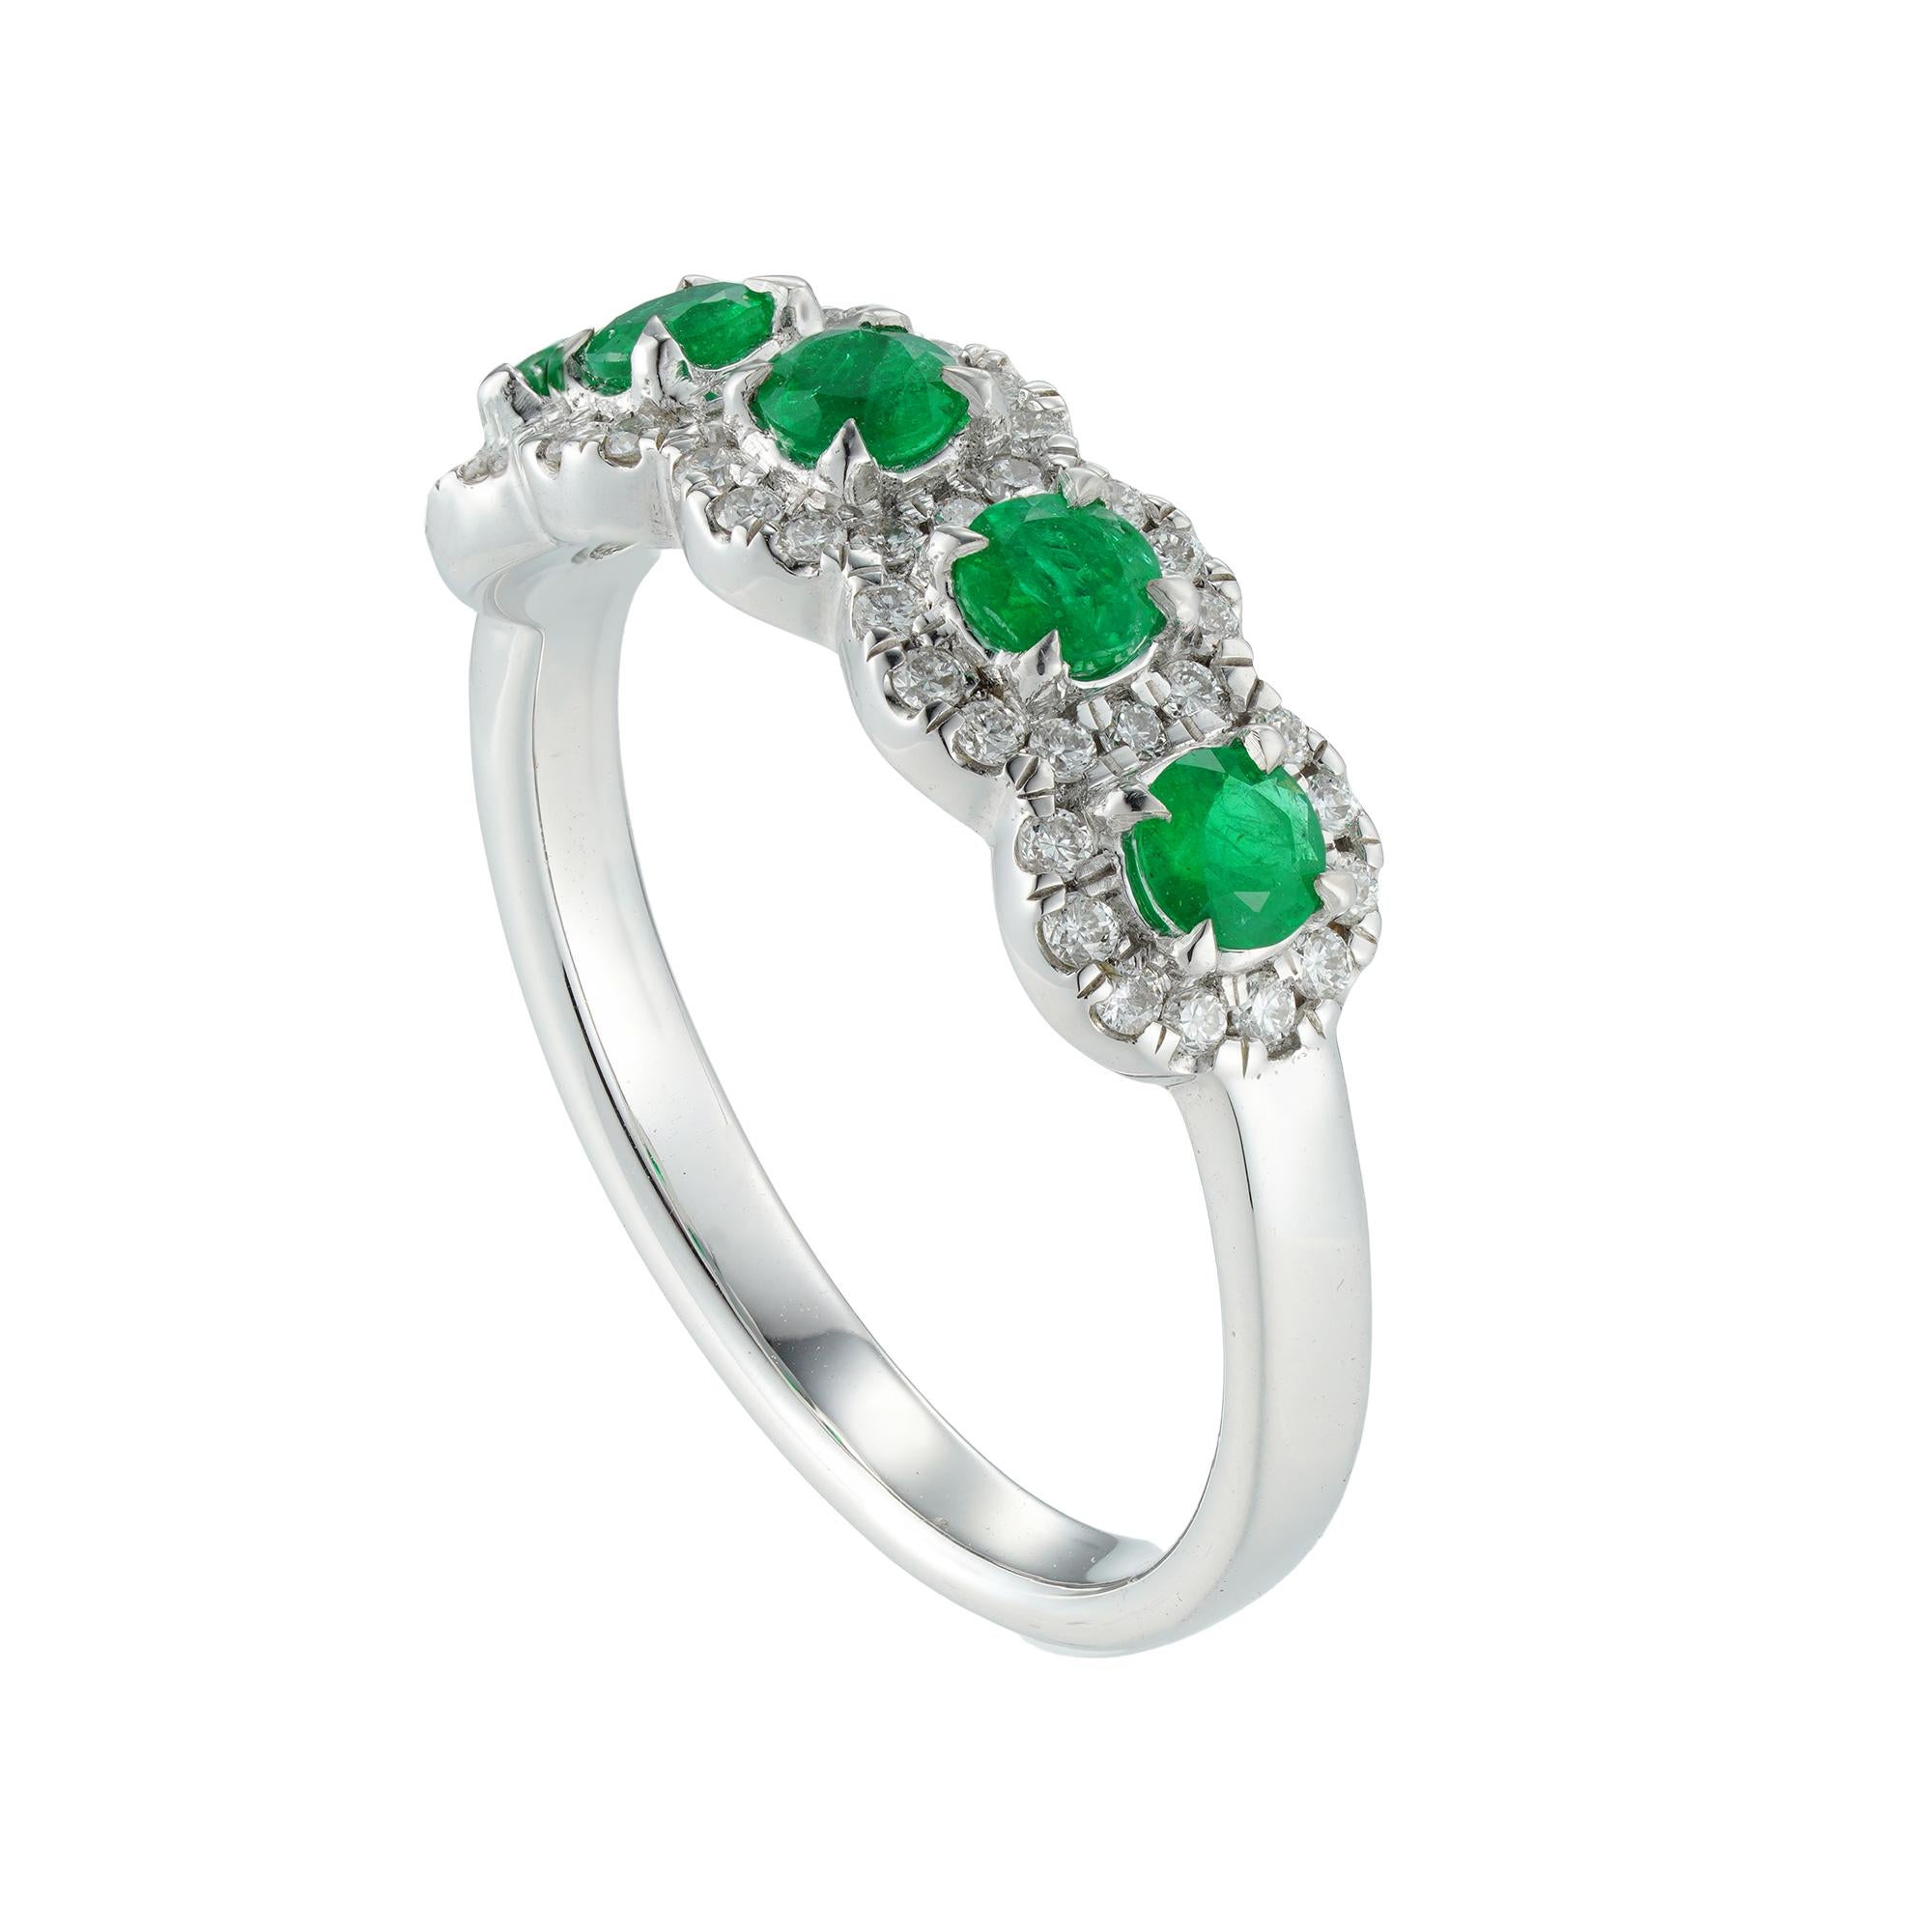 A five emerald and diamond cluster ring, the round faceted emeralds weighing 0.5 carats surrounded by small brilliant-cut diamonds weighing 0.25 carats in total, all claw-set in white gold mount, hallmarked 18ct gold Sheffield, the head measuring